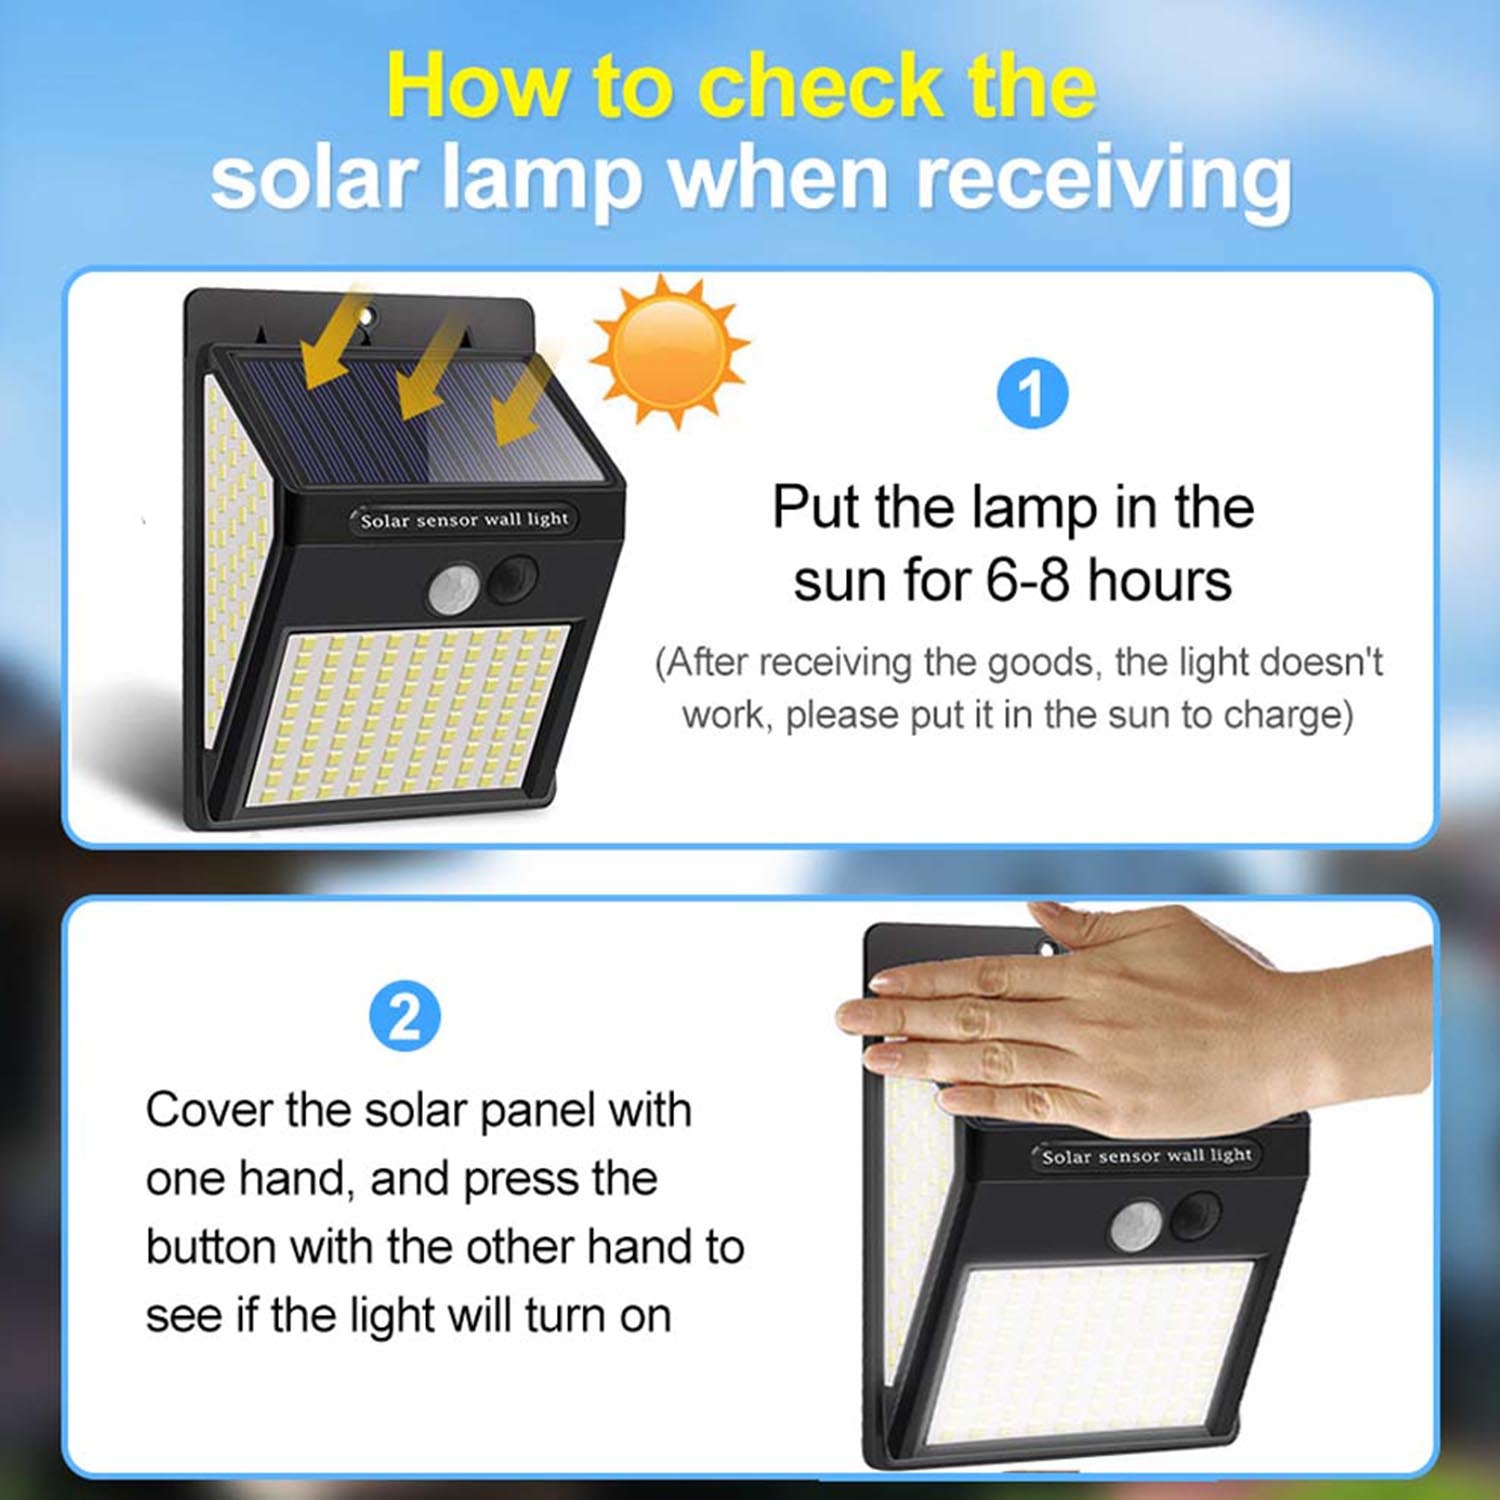 2 Cover the solar panel with Solar sensor wall Iight one hand,